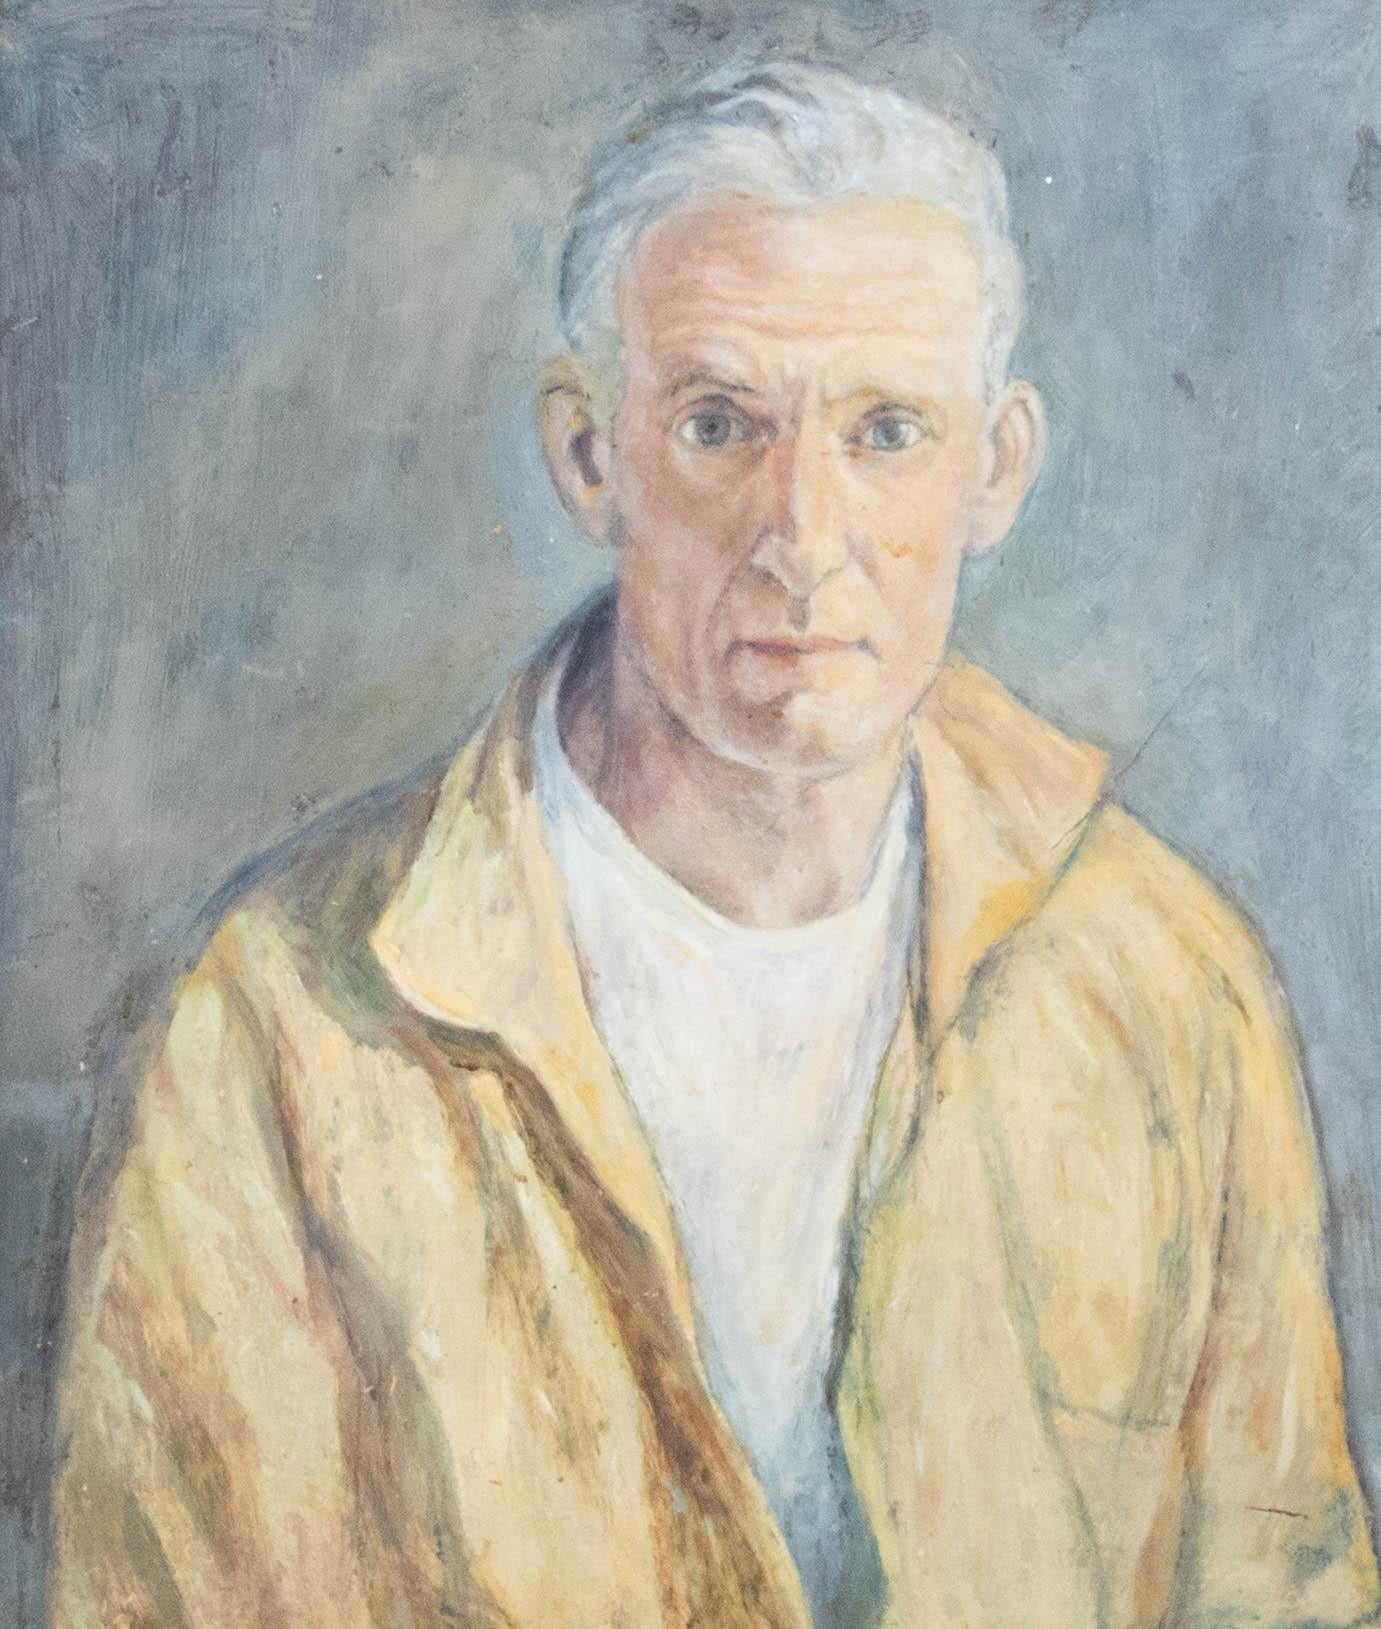 Framed 20th Century Oil - Male Figure in Yellow Shirt - Painting by Unknown